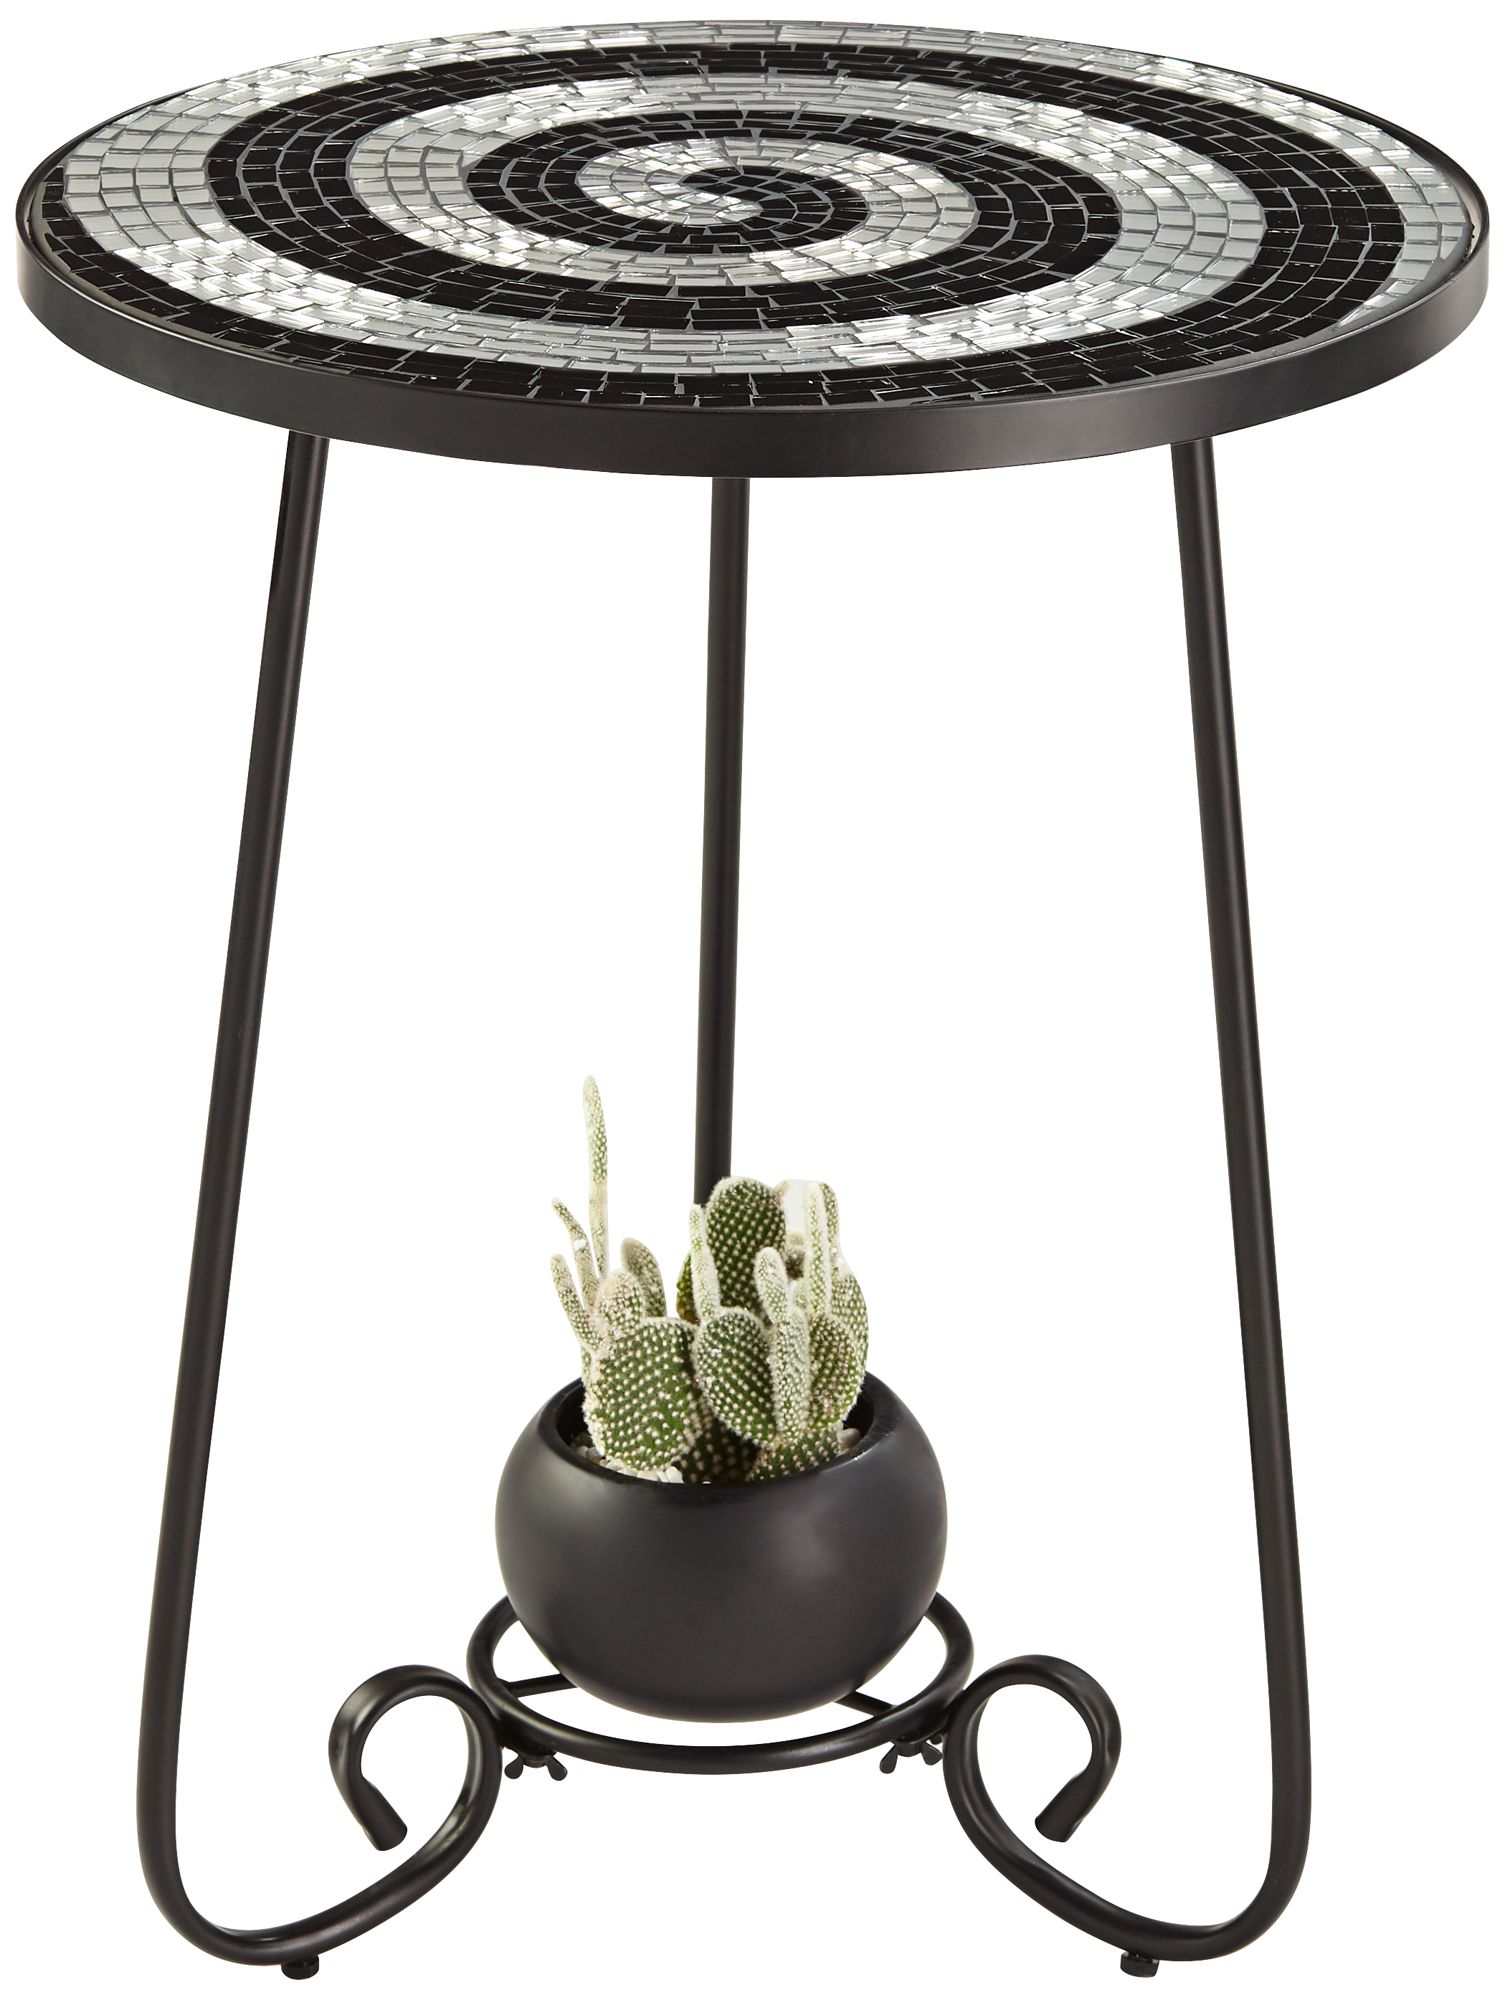 Teal Island Designs Modern Black Round Outdoor Accent Side Table 17 3/4" Wide Black White Tile Mosaic Tabletop Front Porch Patio Home House - image 5 of 8